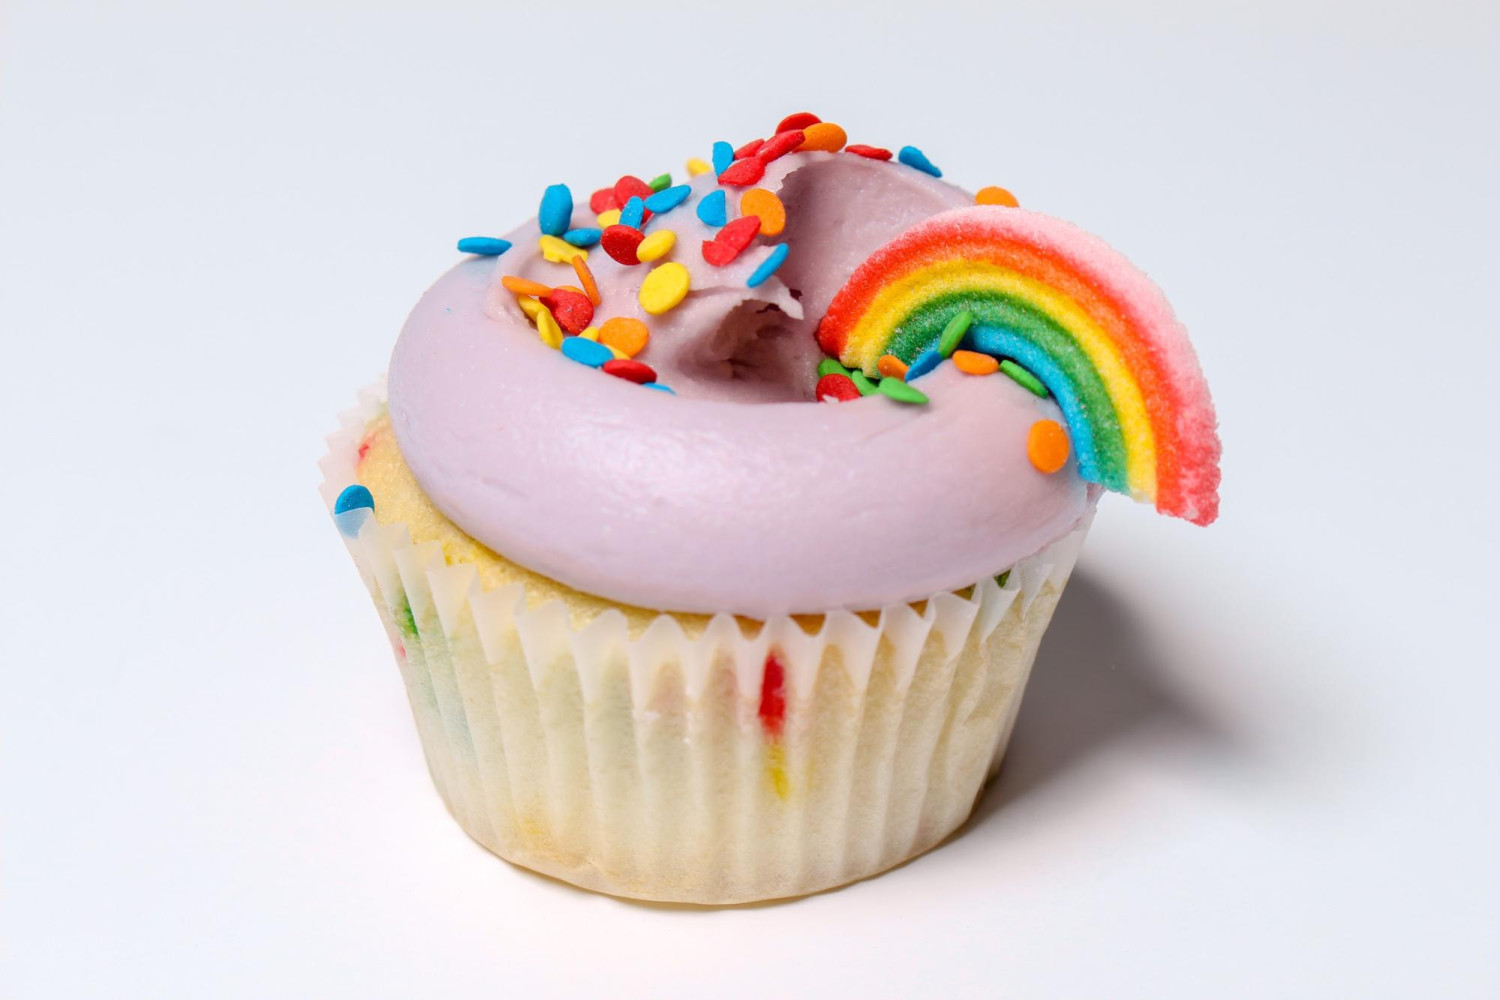 Rainbow cupcake with pastel purple frosting - Lockdown Entertainment Guide Food Edition